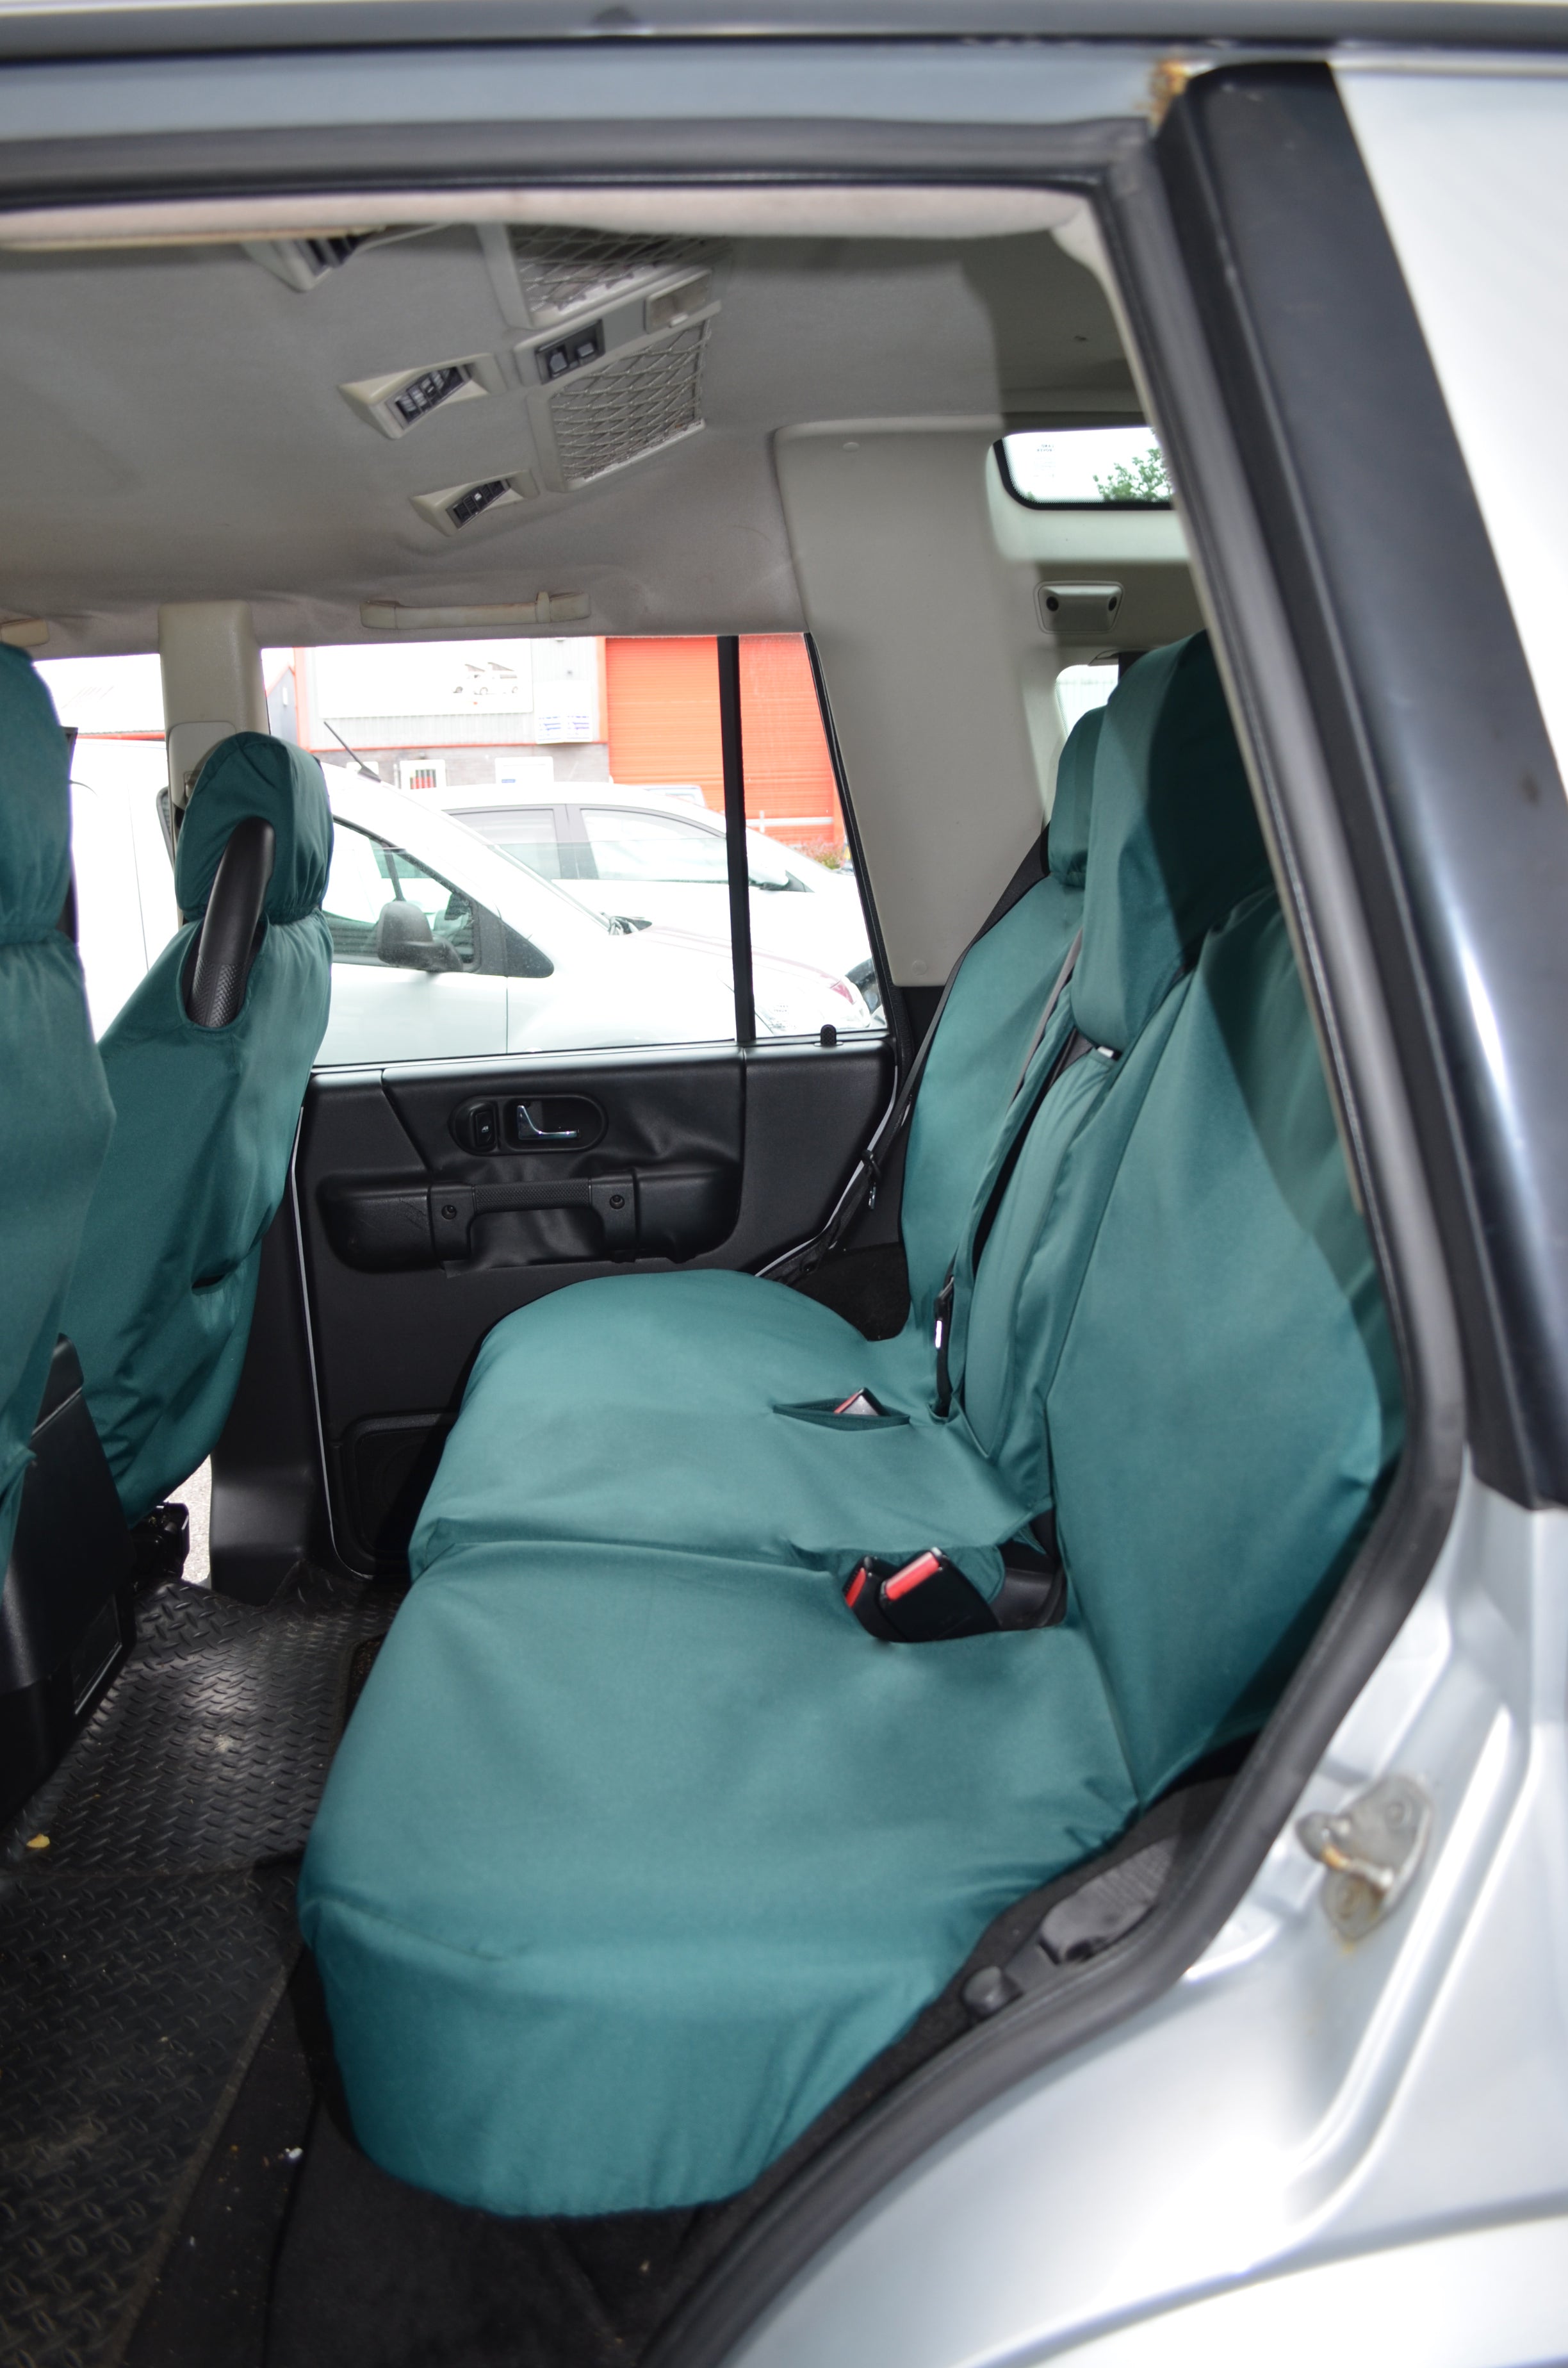 Land Rover Discovery 1998 - 2004 Series 2 Seat Covers Rear 2nd Row / Green Turtle Covers Ltd